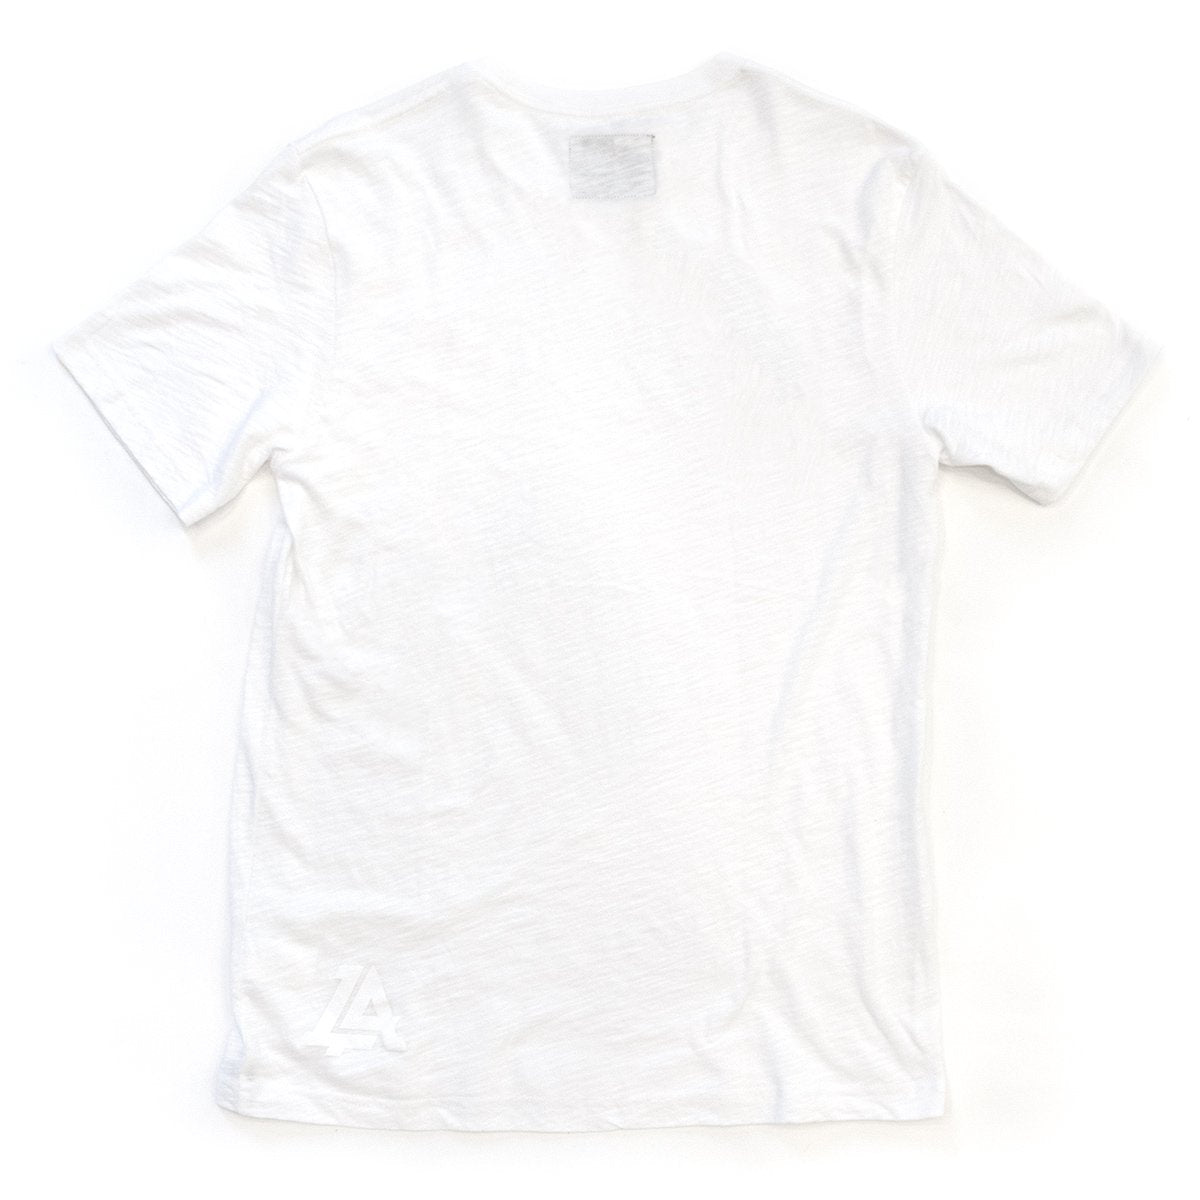 Lost Art Canada - white on white ghost logo tee back view